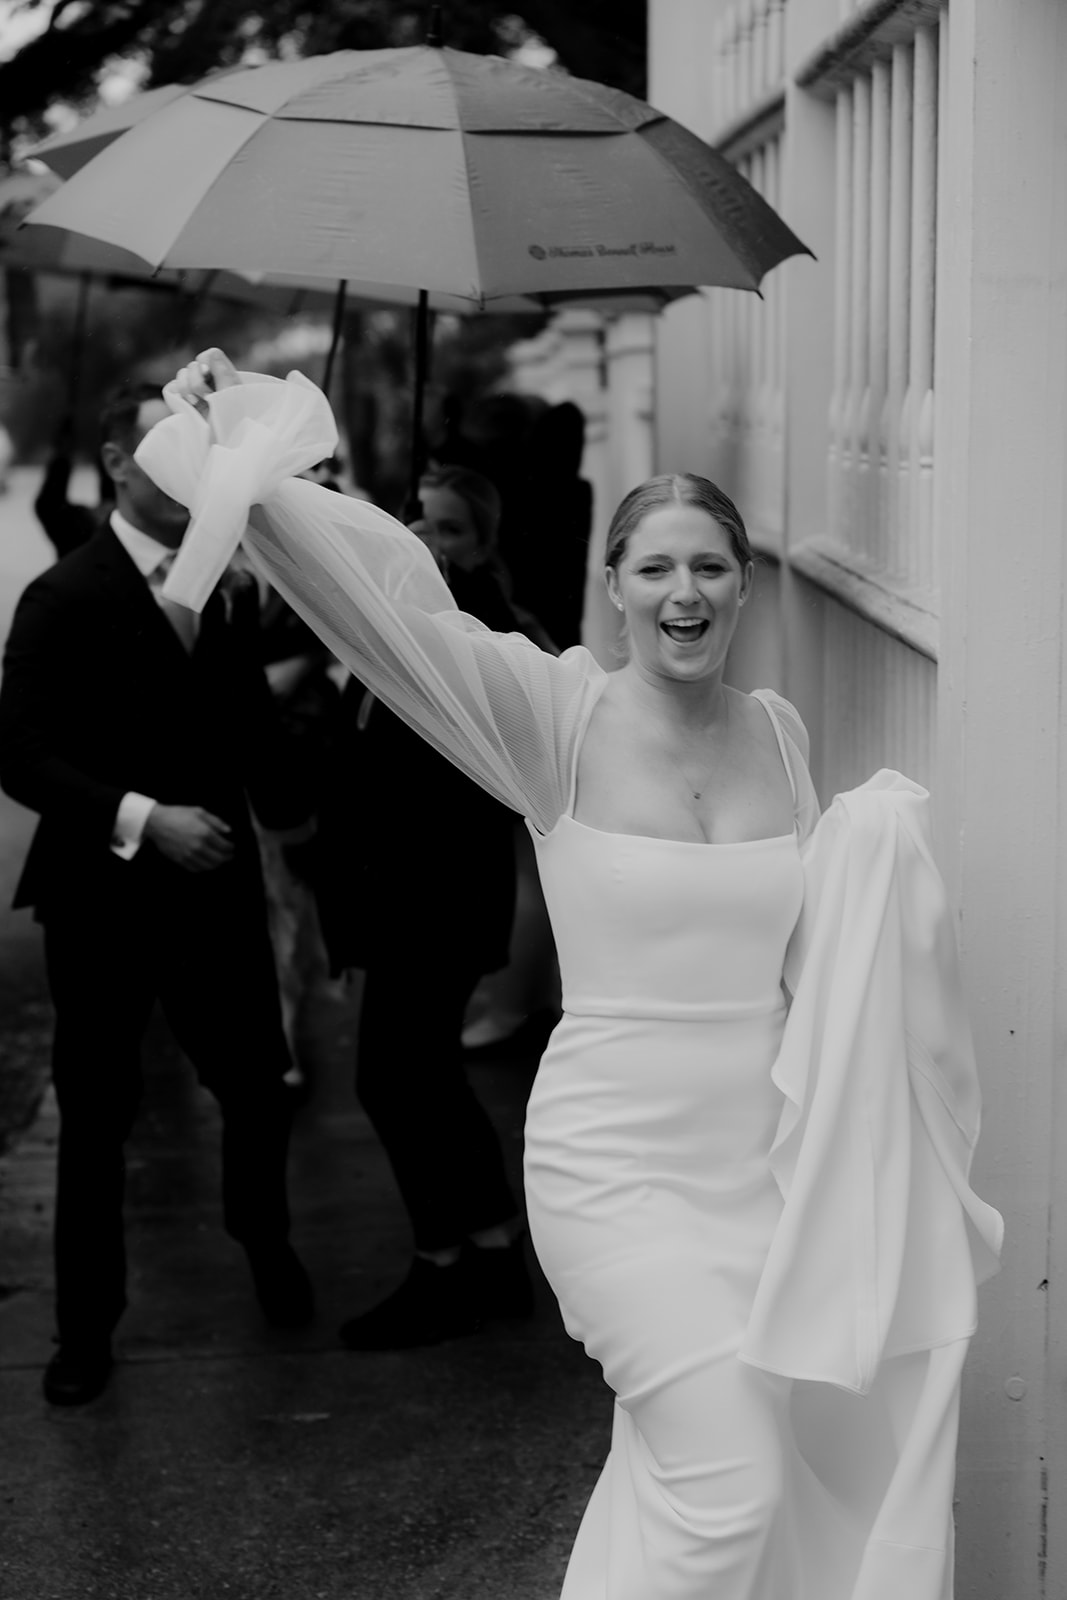 Bride arriving for Wedding at Gov. Thomas Bennett House. Lifting right arm and cheers towards camera. Umbrella and bridal party in the background